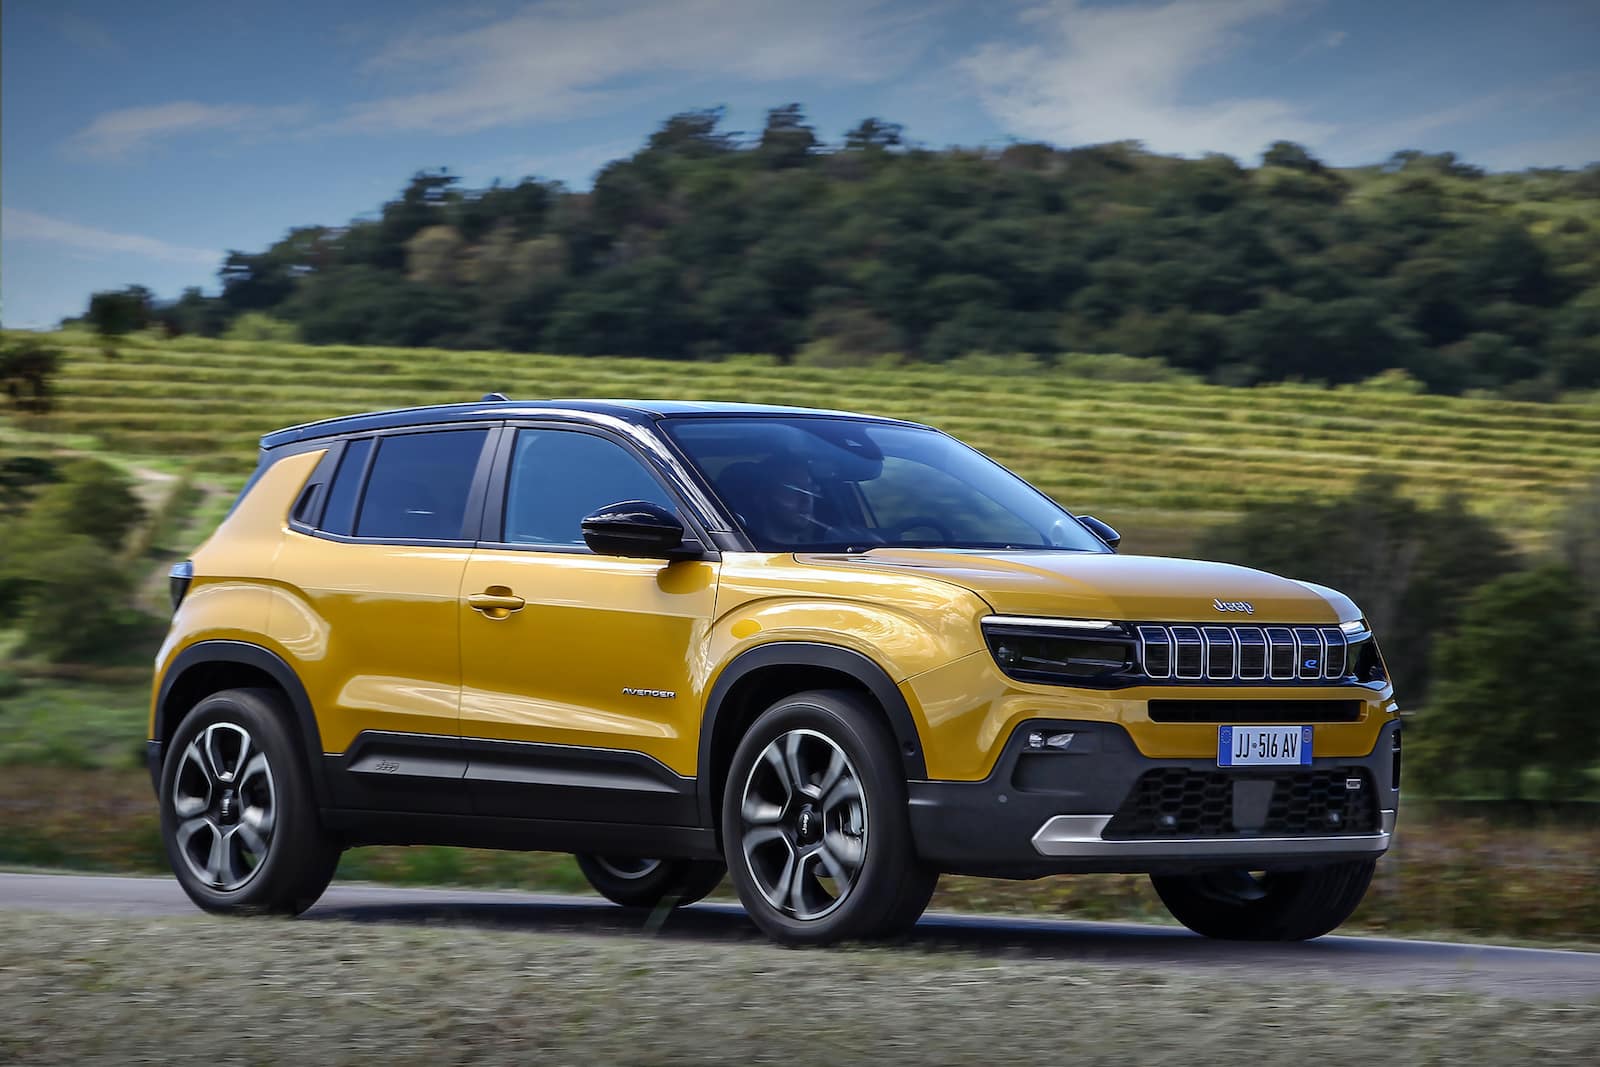 Jeep Reveal Electric SUV in Paris